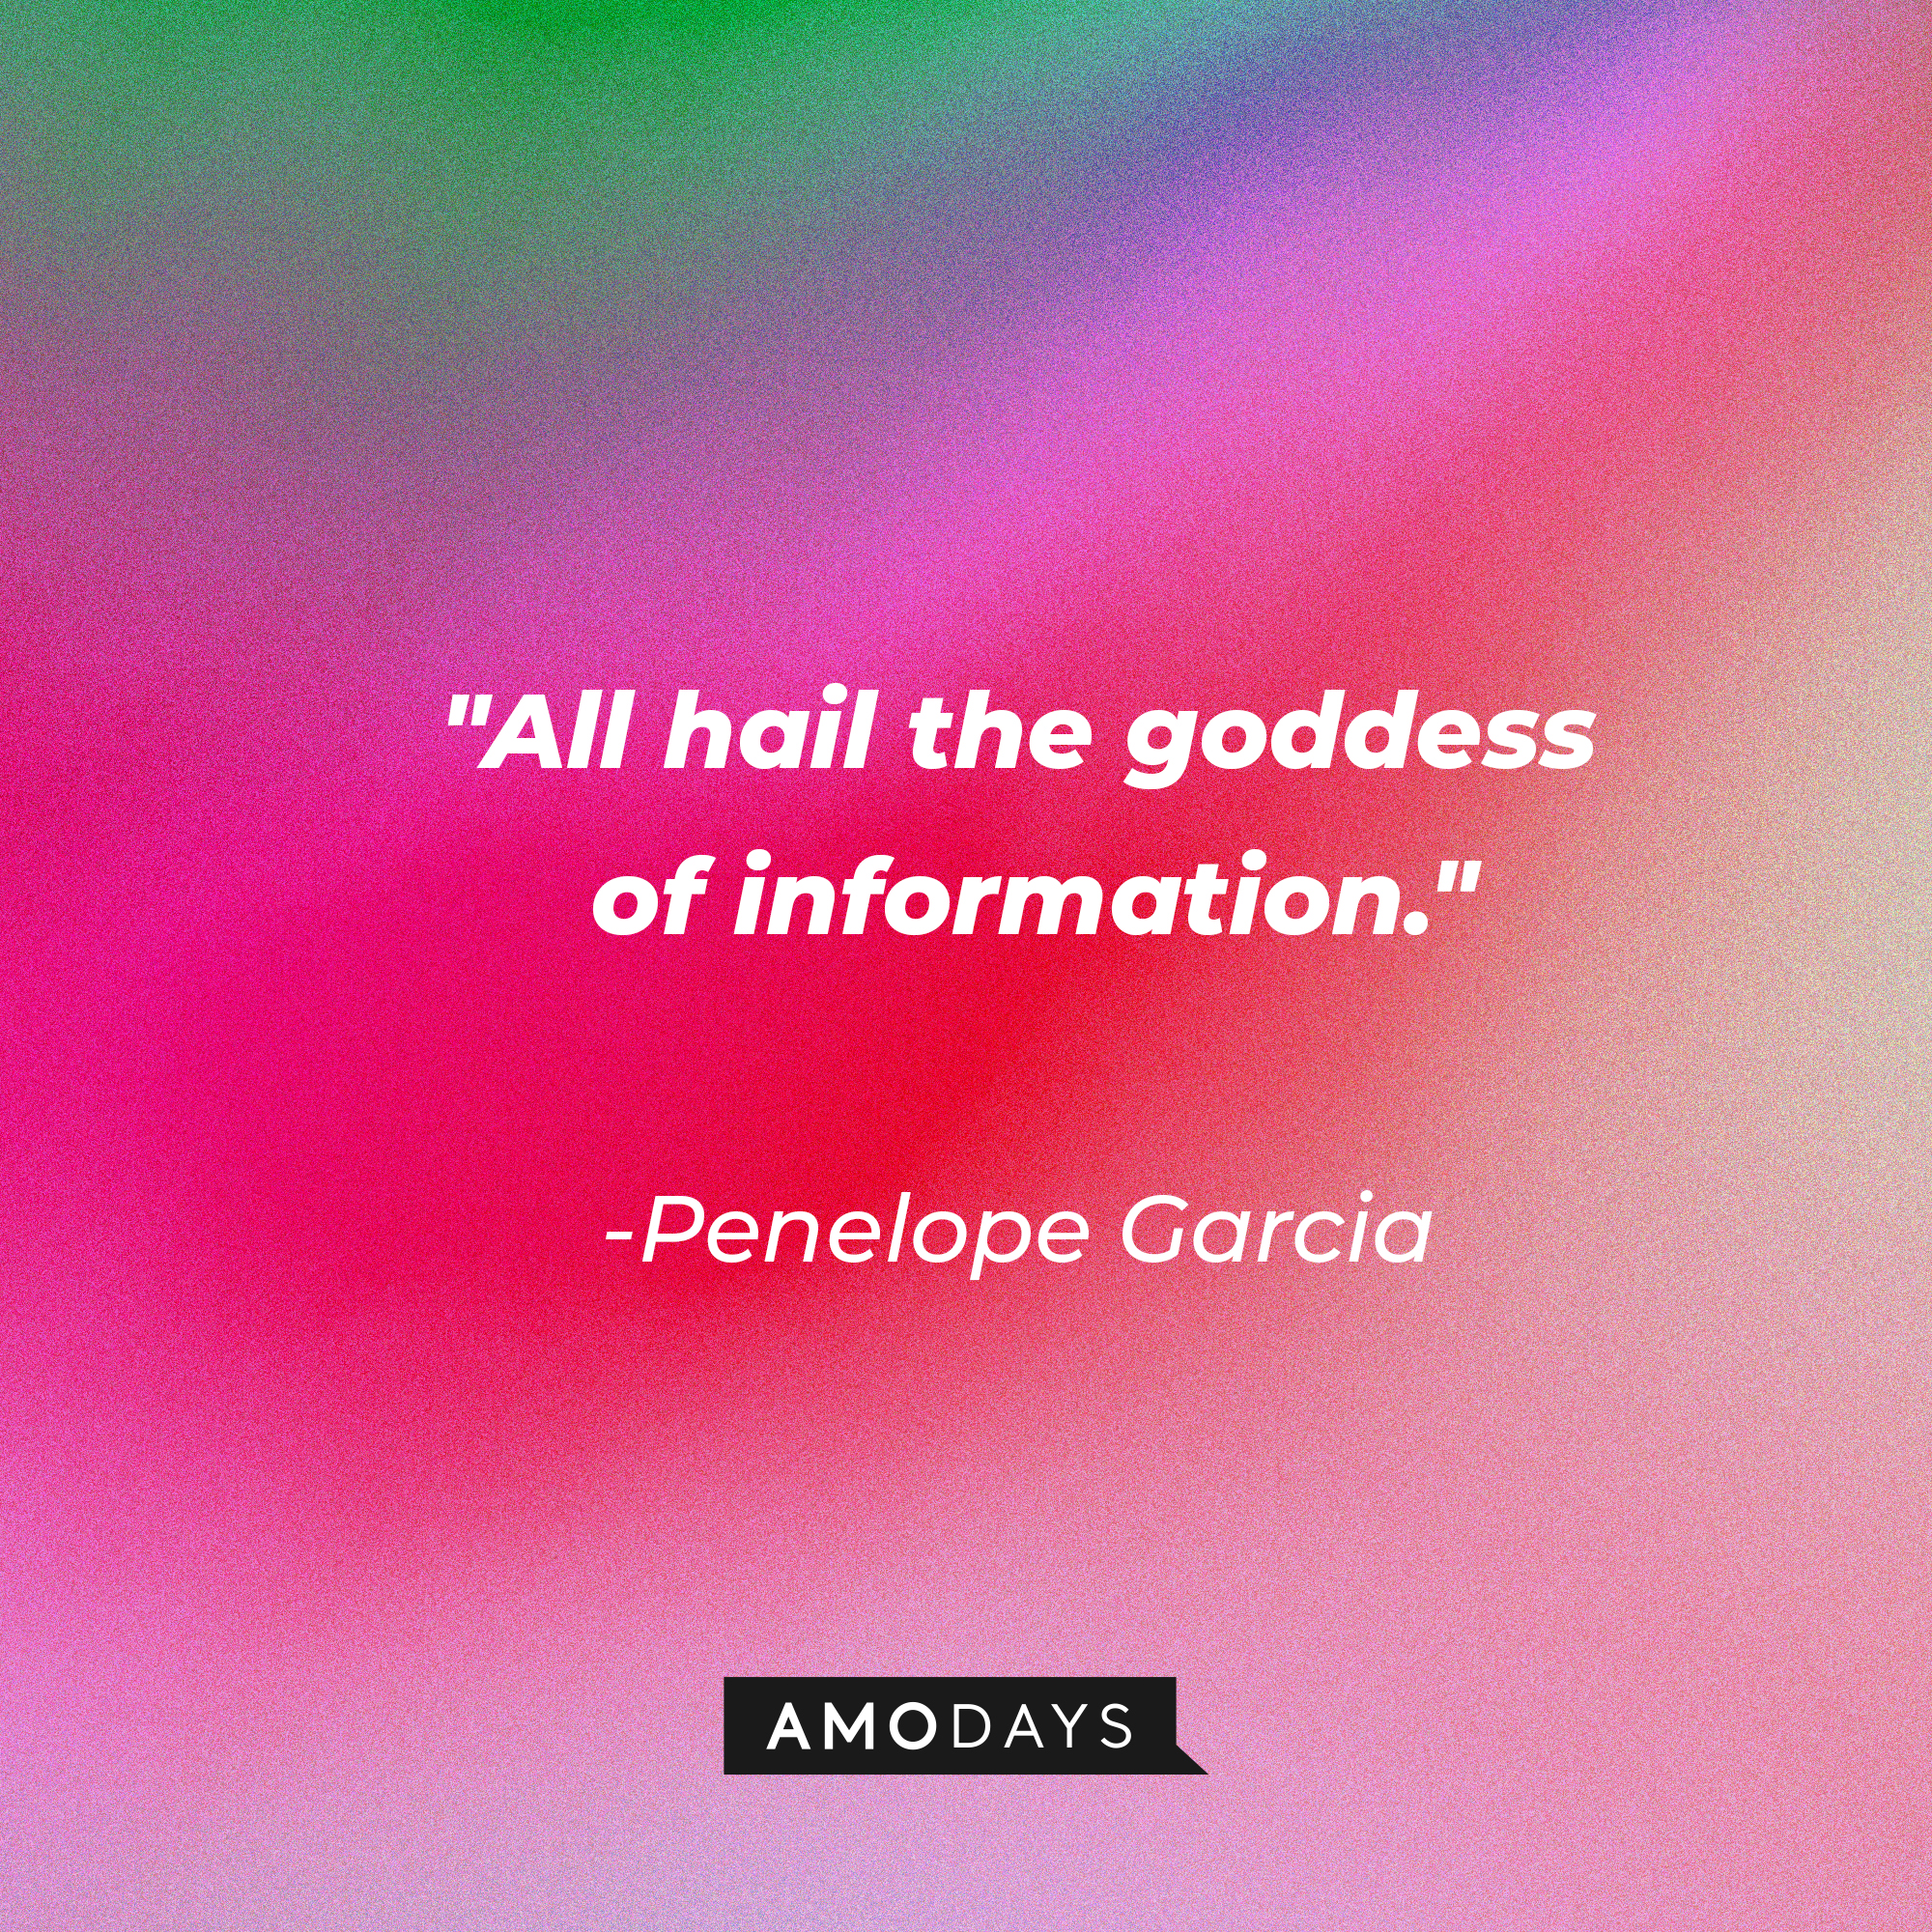 Penelope Garcia's quote: "All hail the goddess of information." | Source: AmoDays